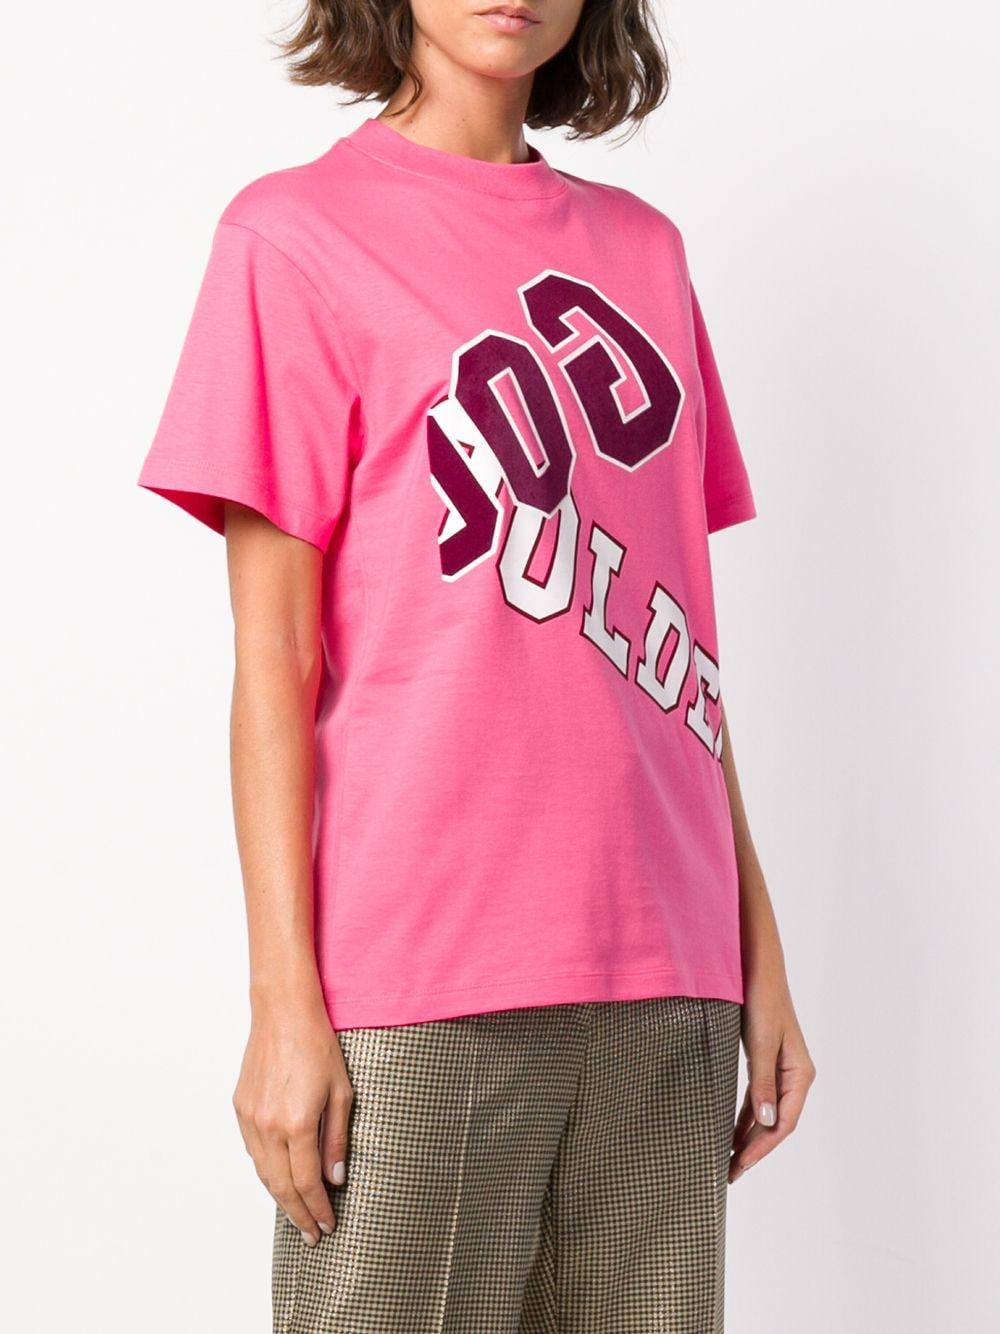 Golden Goose Deluxe Brand Goose Logo Printed Cotton T-shirt in Pink ...